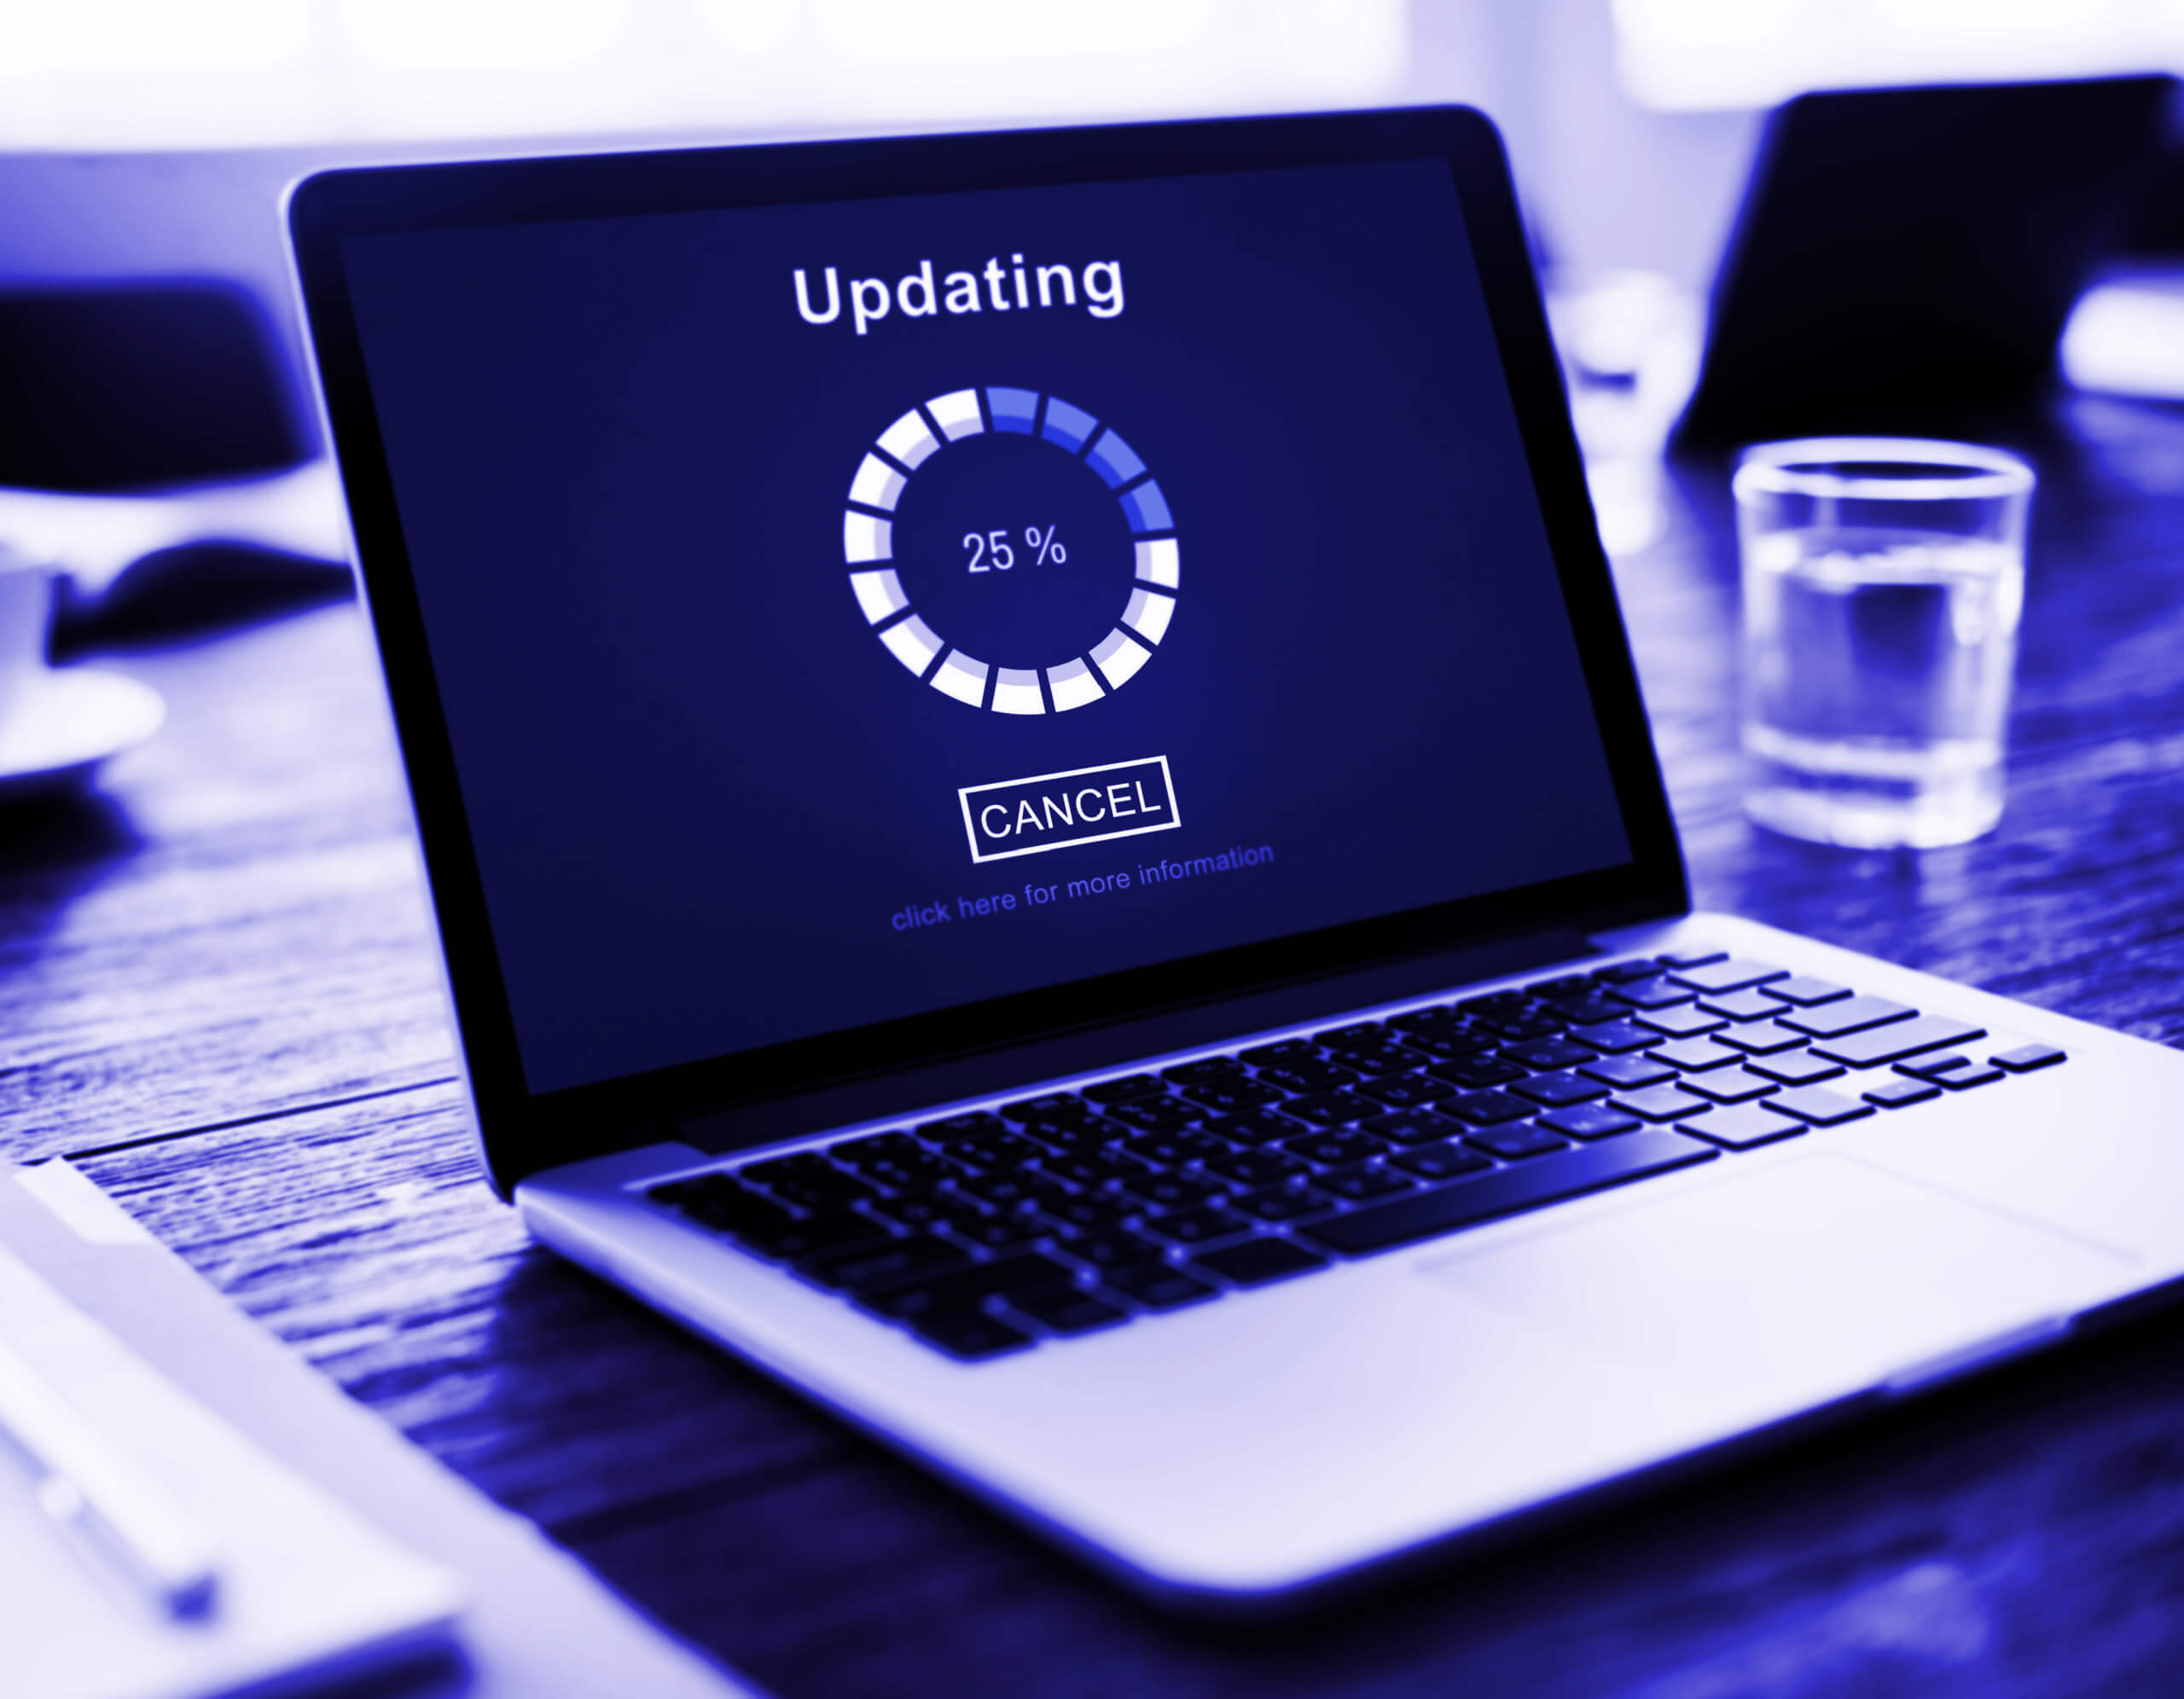 Update needed, software vulnerability management and best practices 2022